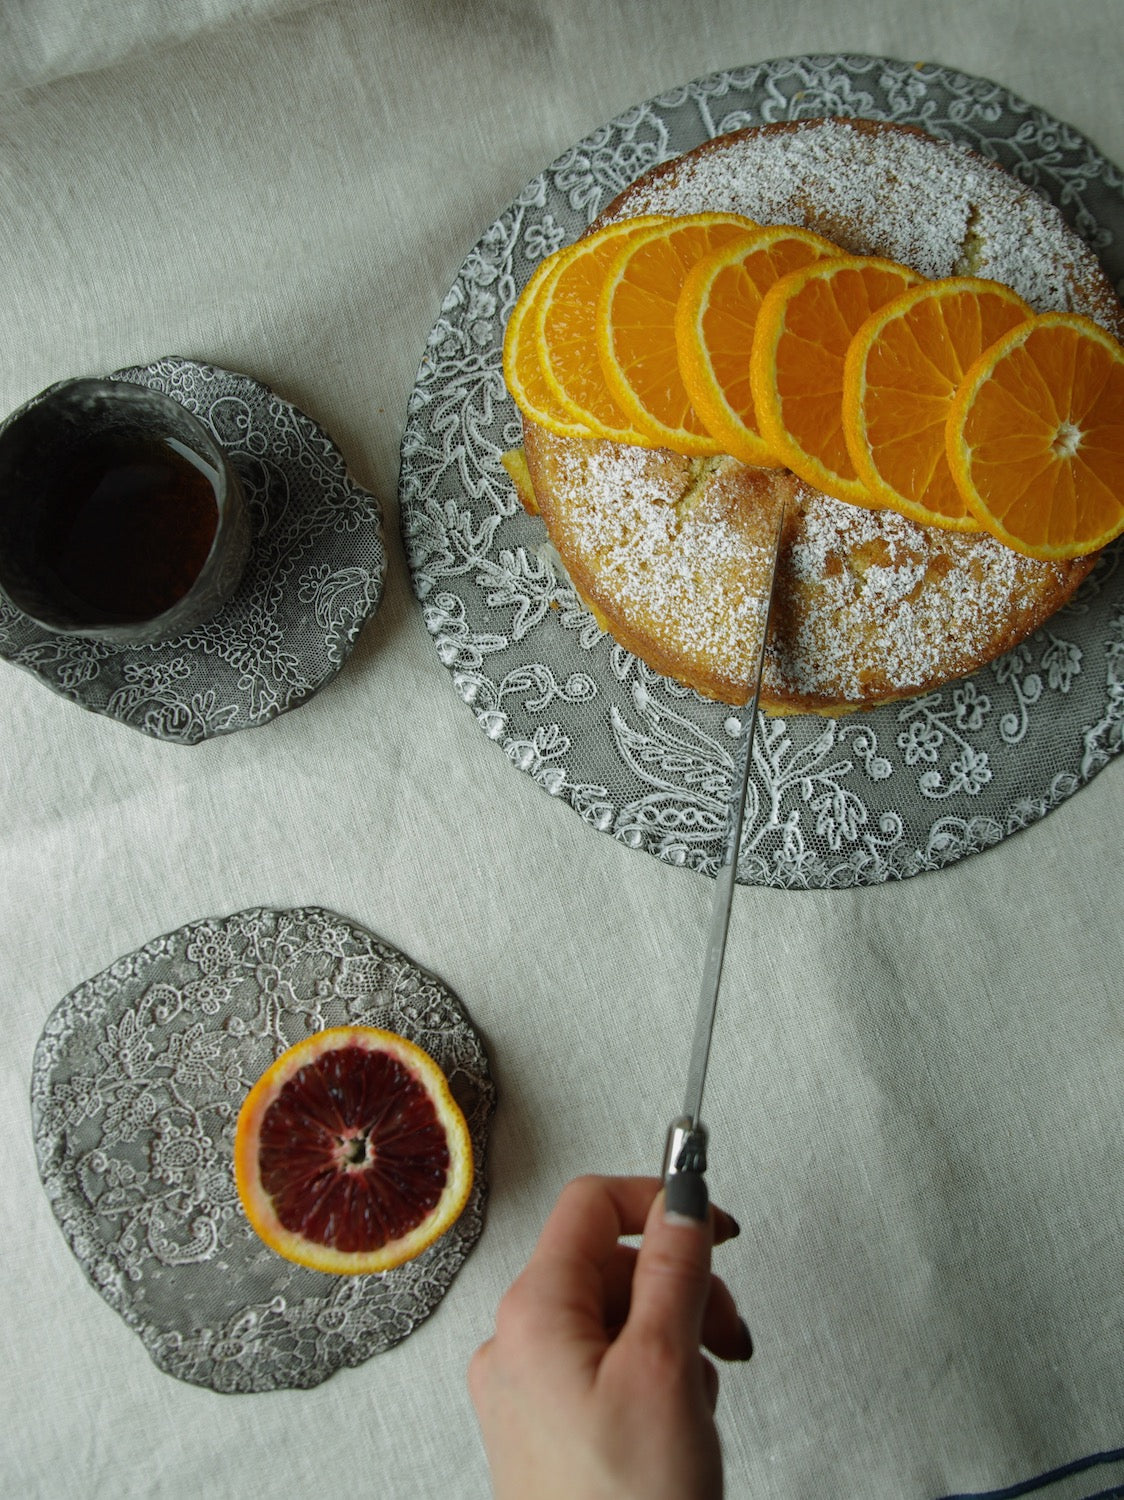 Cake covered in orange slices served on lace pattern ceramic platter with Laguiole cake slicer.